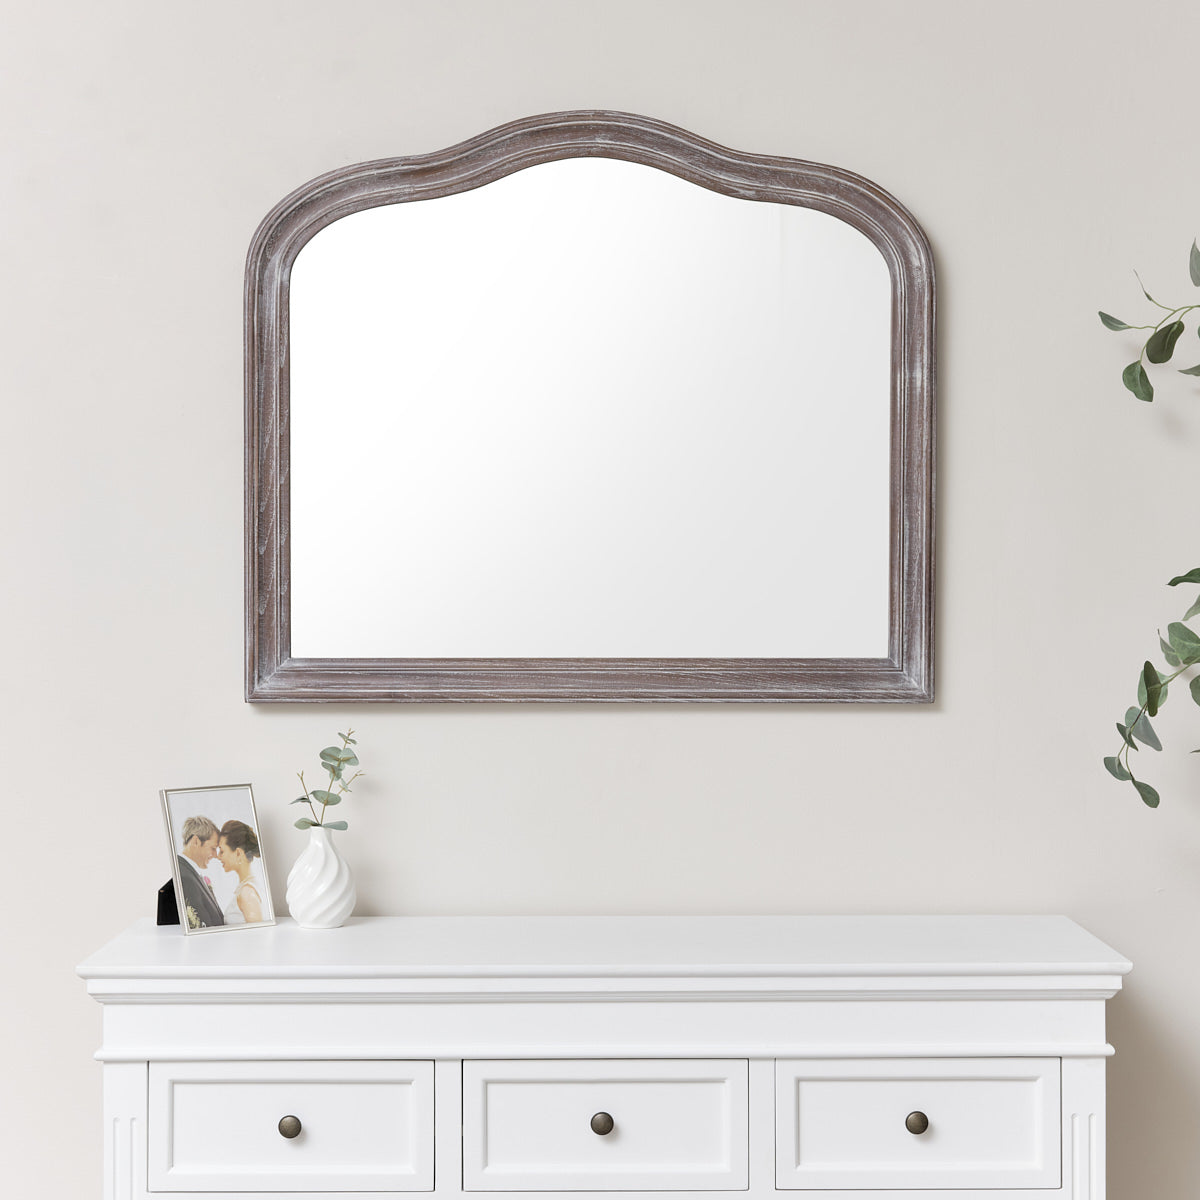 Large Arched Wooden Framed Wall Mirror 90cm x 77cm